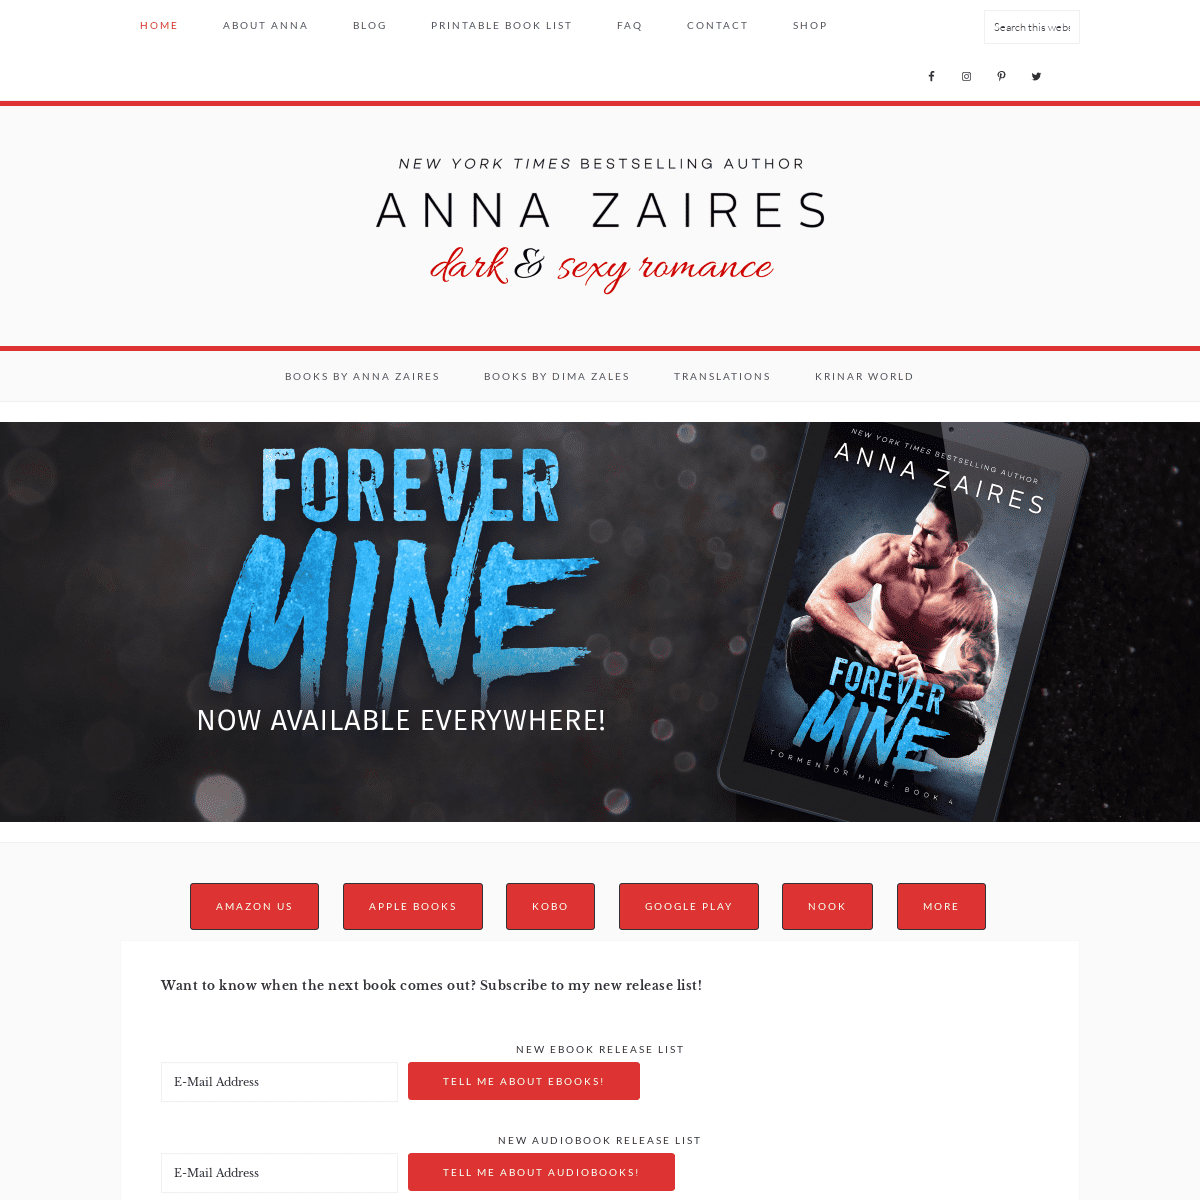 Anna Zaires - Author of the Twist Me series & the Krinar Chronicles